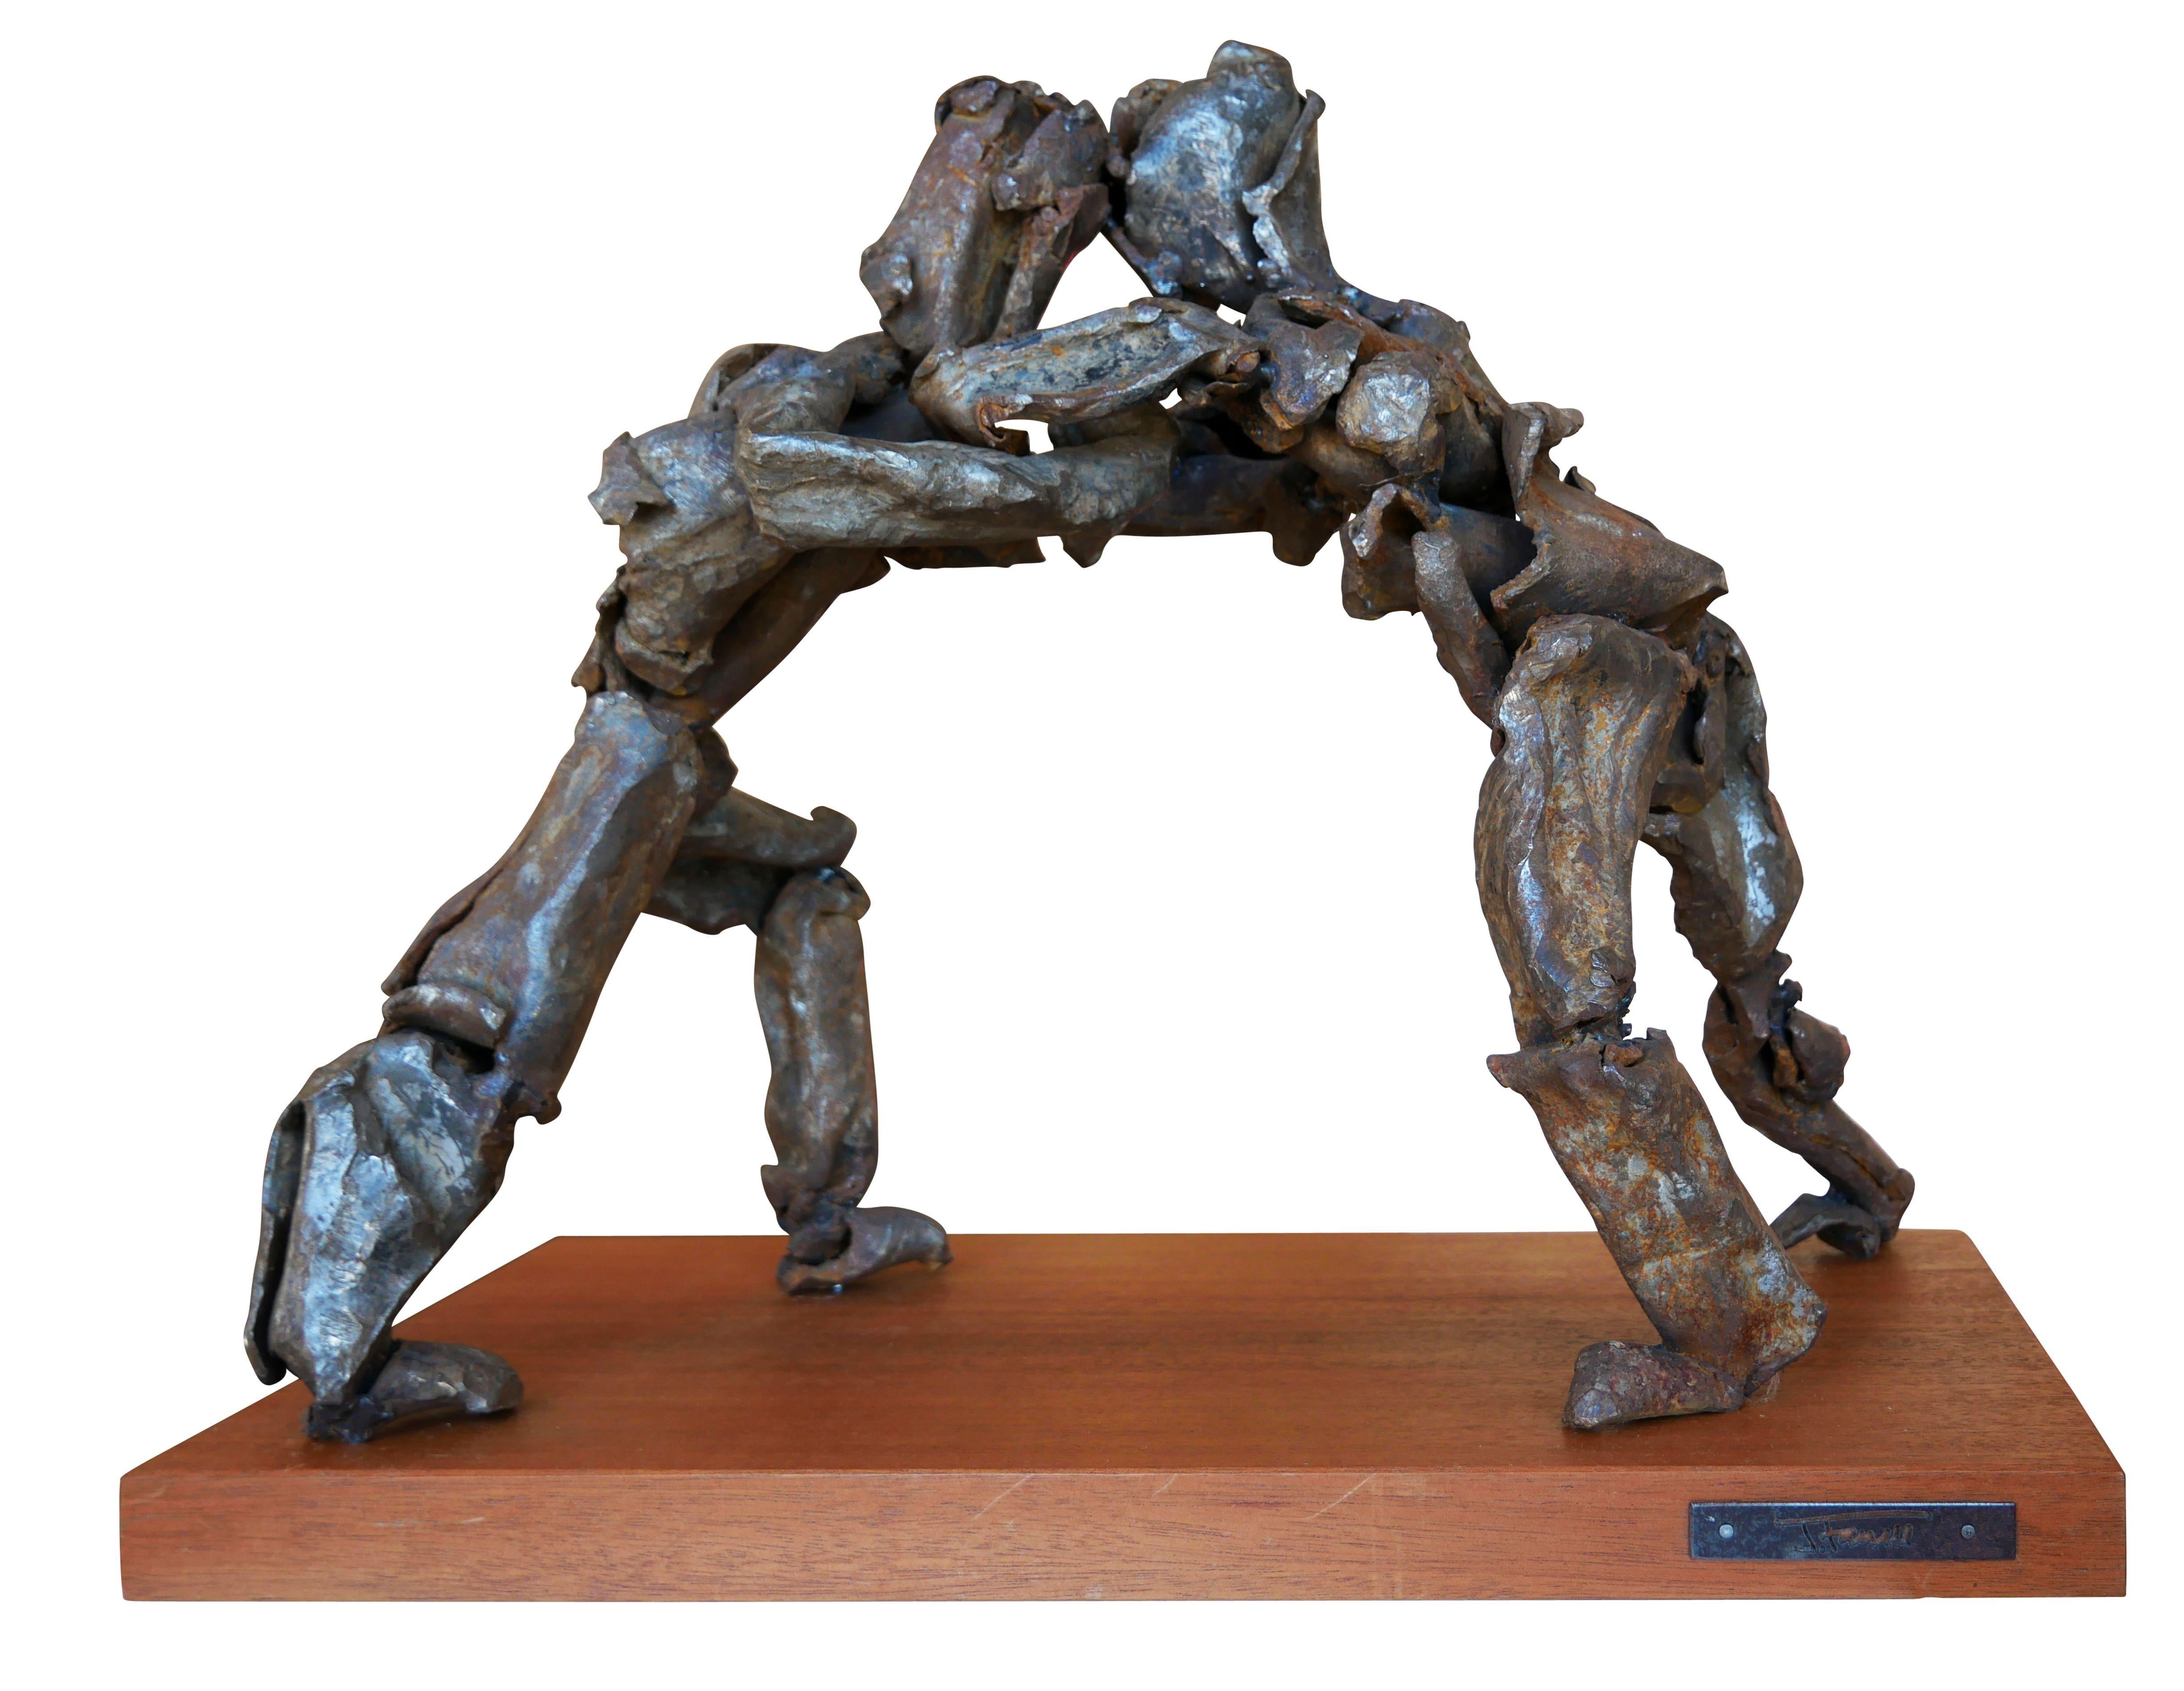 Jack Farrell Abstract Sculpture - "Sumo" Modernist Abstract Figurative Steel and Wood Sculpture